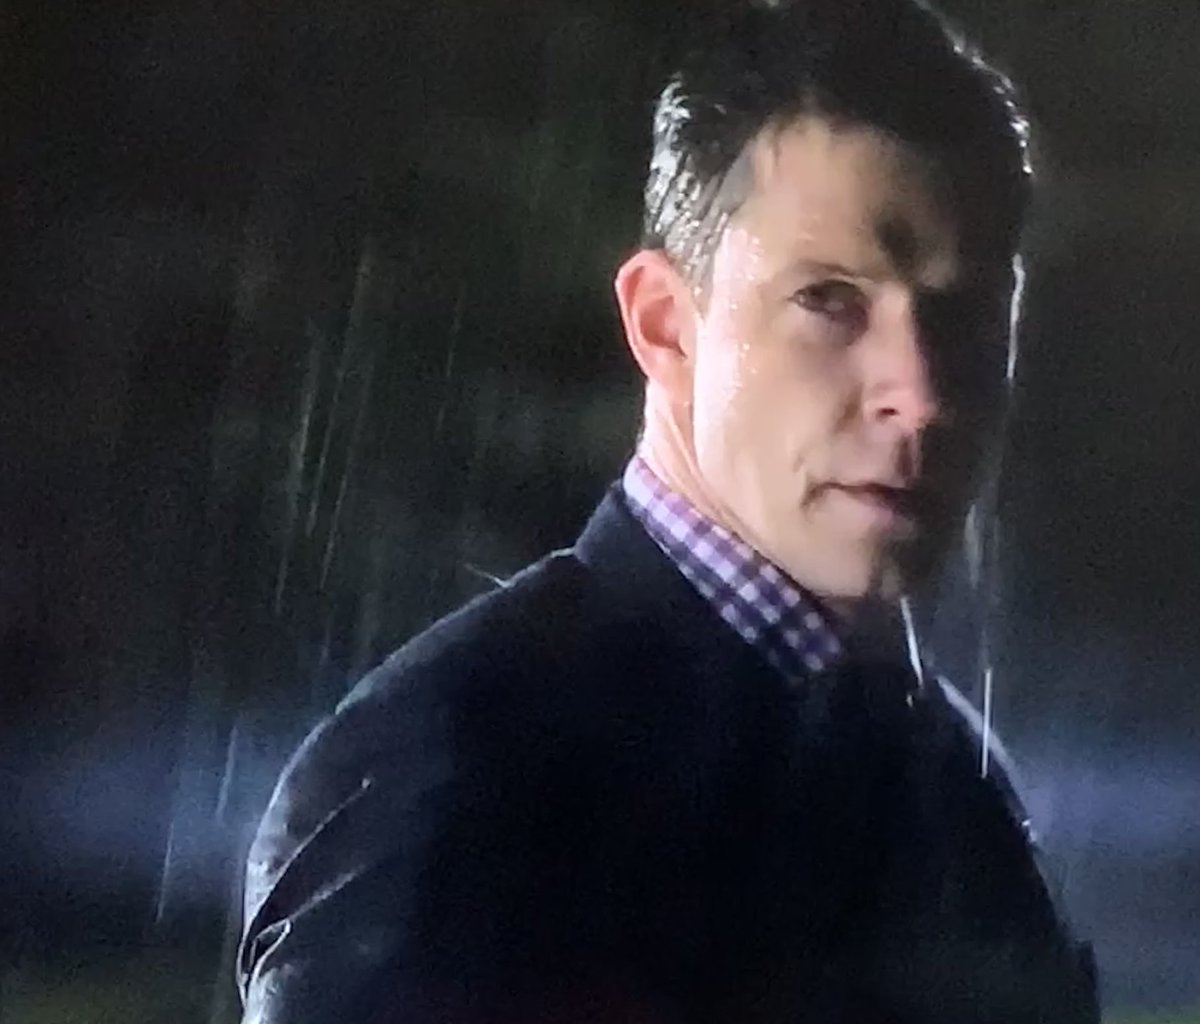 #POstaWordsPics #POstables PLACE: Denver Mercy. 1st time we see it is in #SG, where Billy is sent after his motorcycle crash & remains due 2 a brain injury. A miracle occurs when he plays Daisy & remembers who he is; the 1st of many events that take place here(c below) #RenewSSD